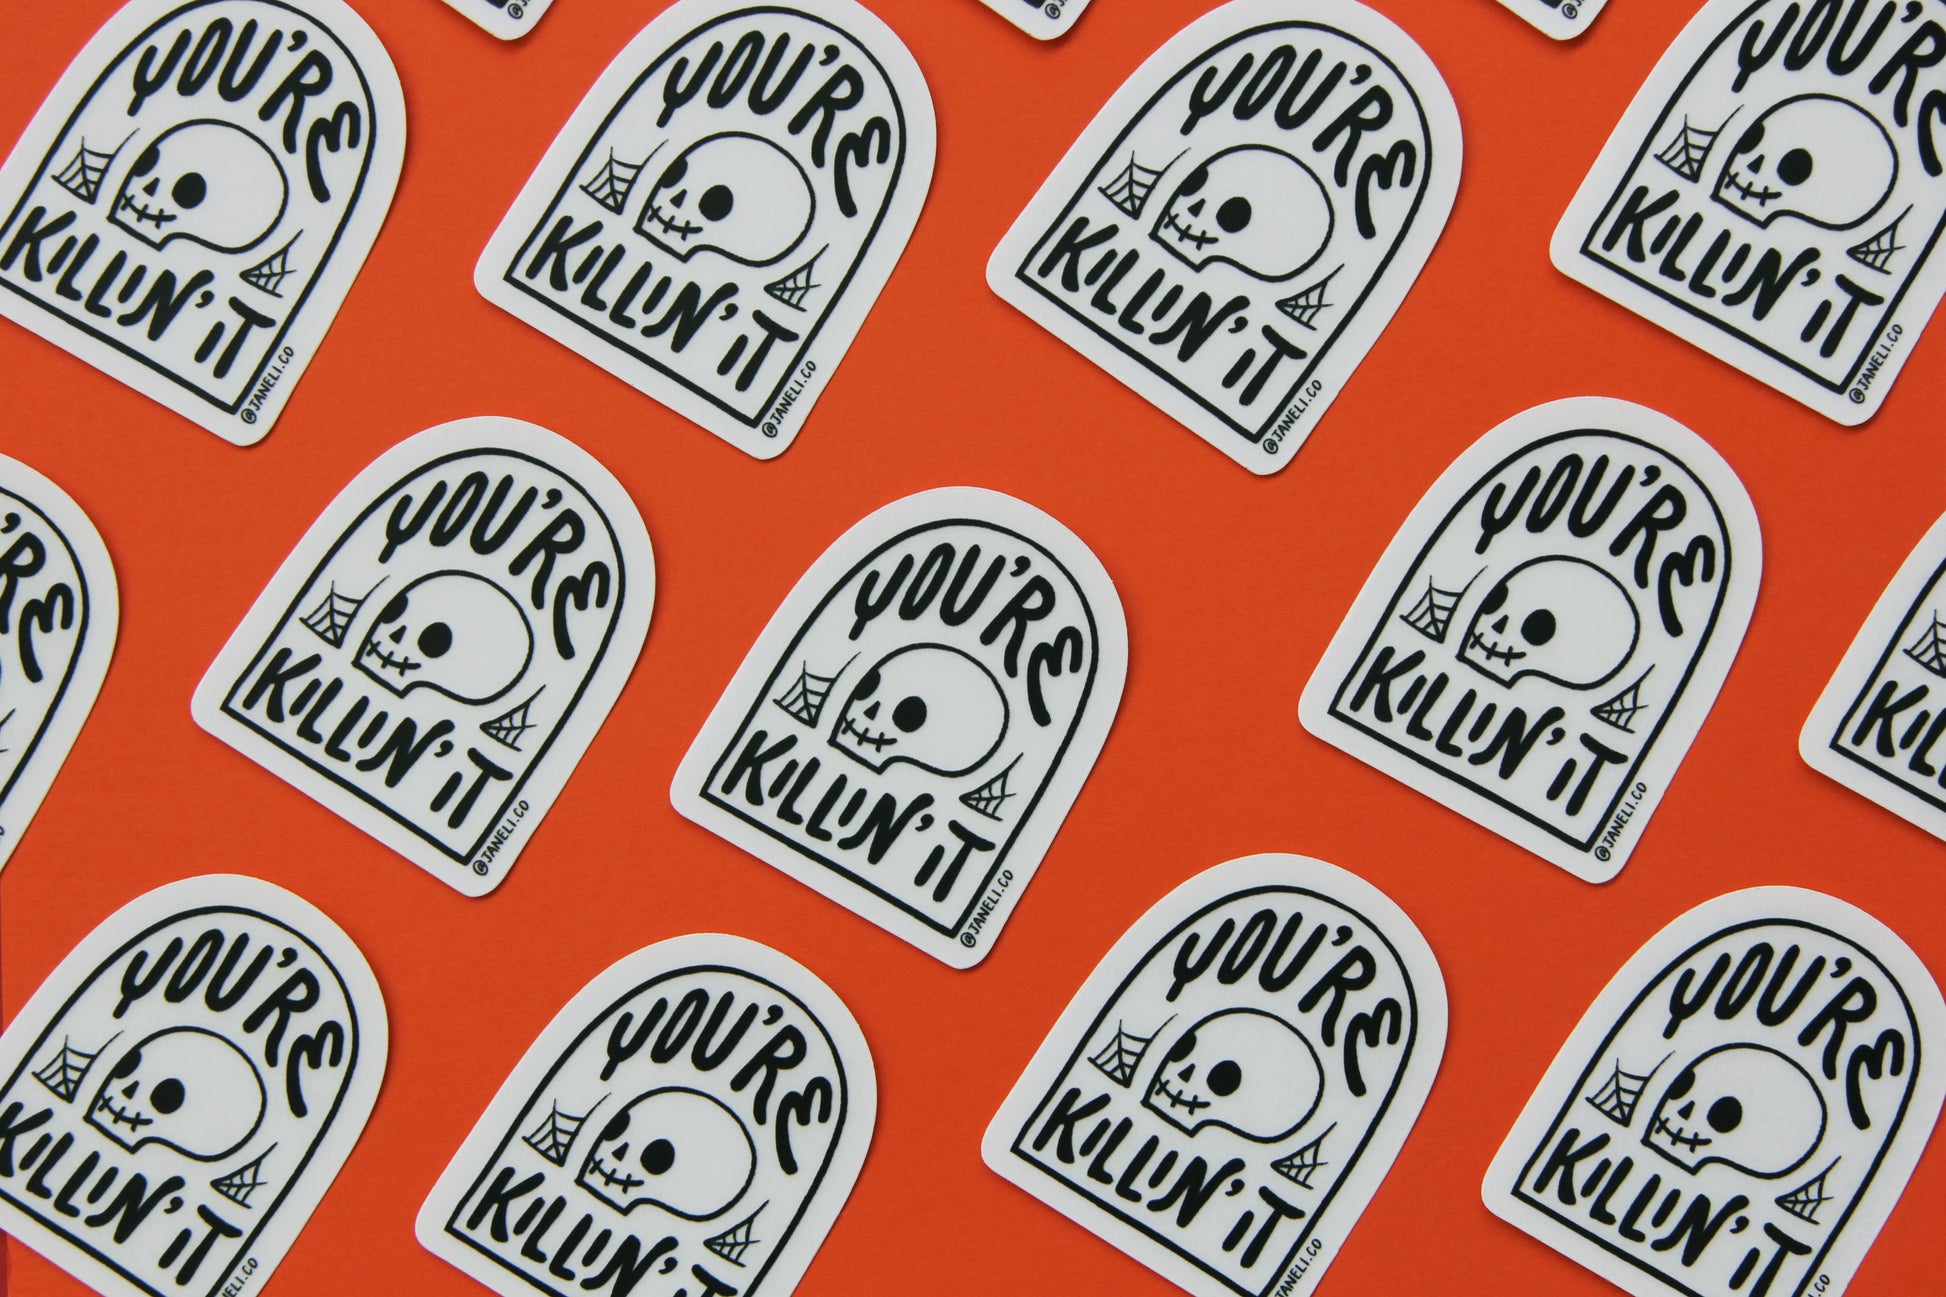 A grid of JaneLi.Co stickers that say "You're Killin' It" in the shape of tombstones with skulls in them over an orange background.